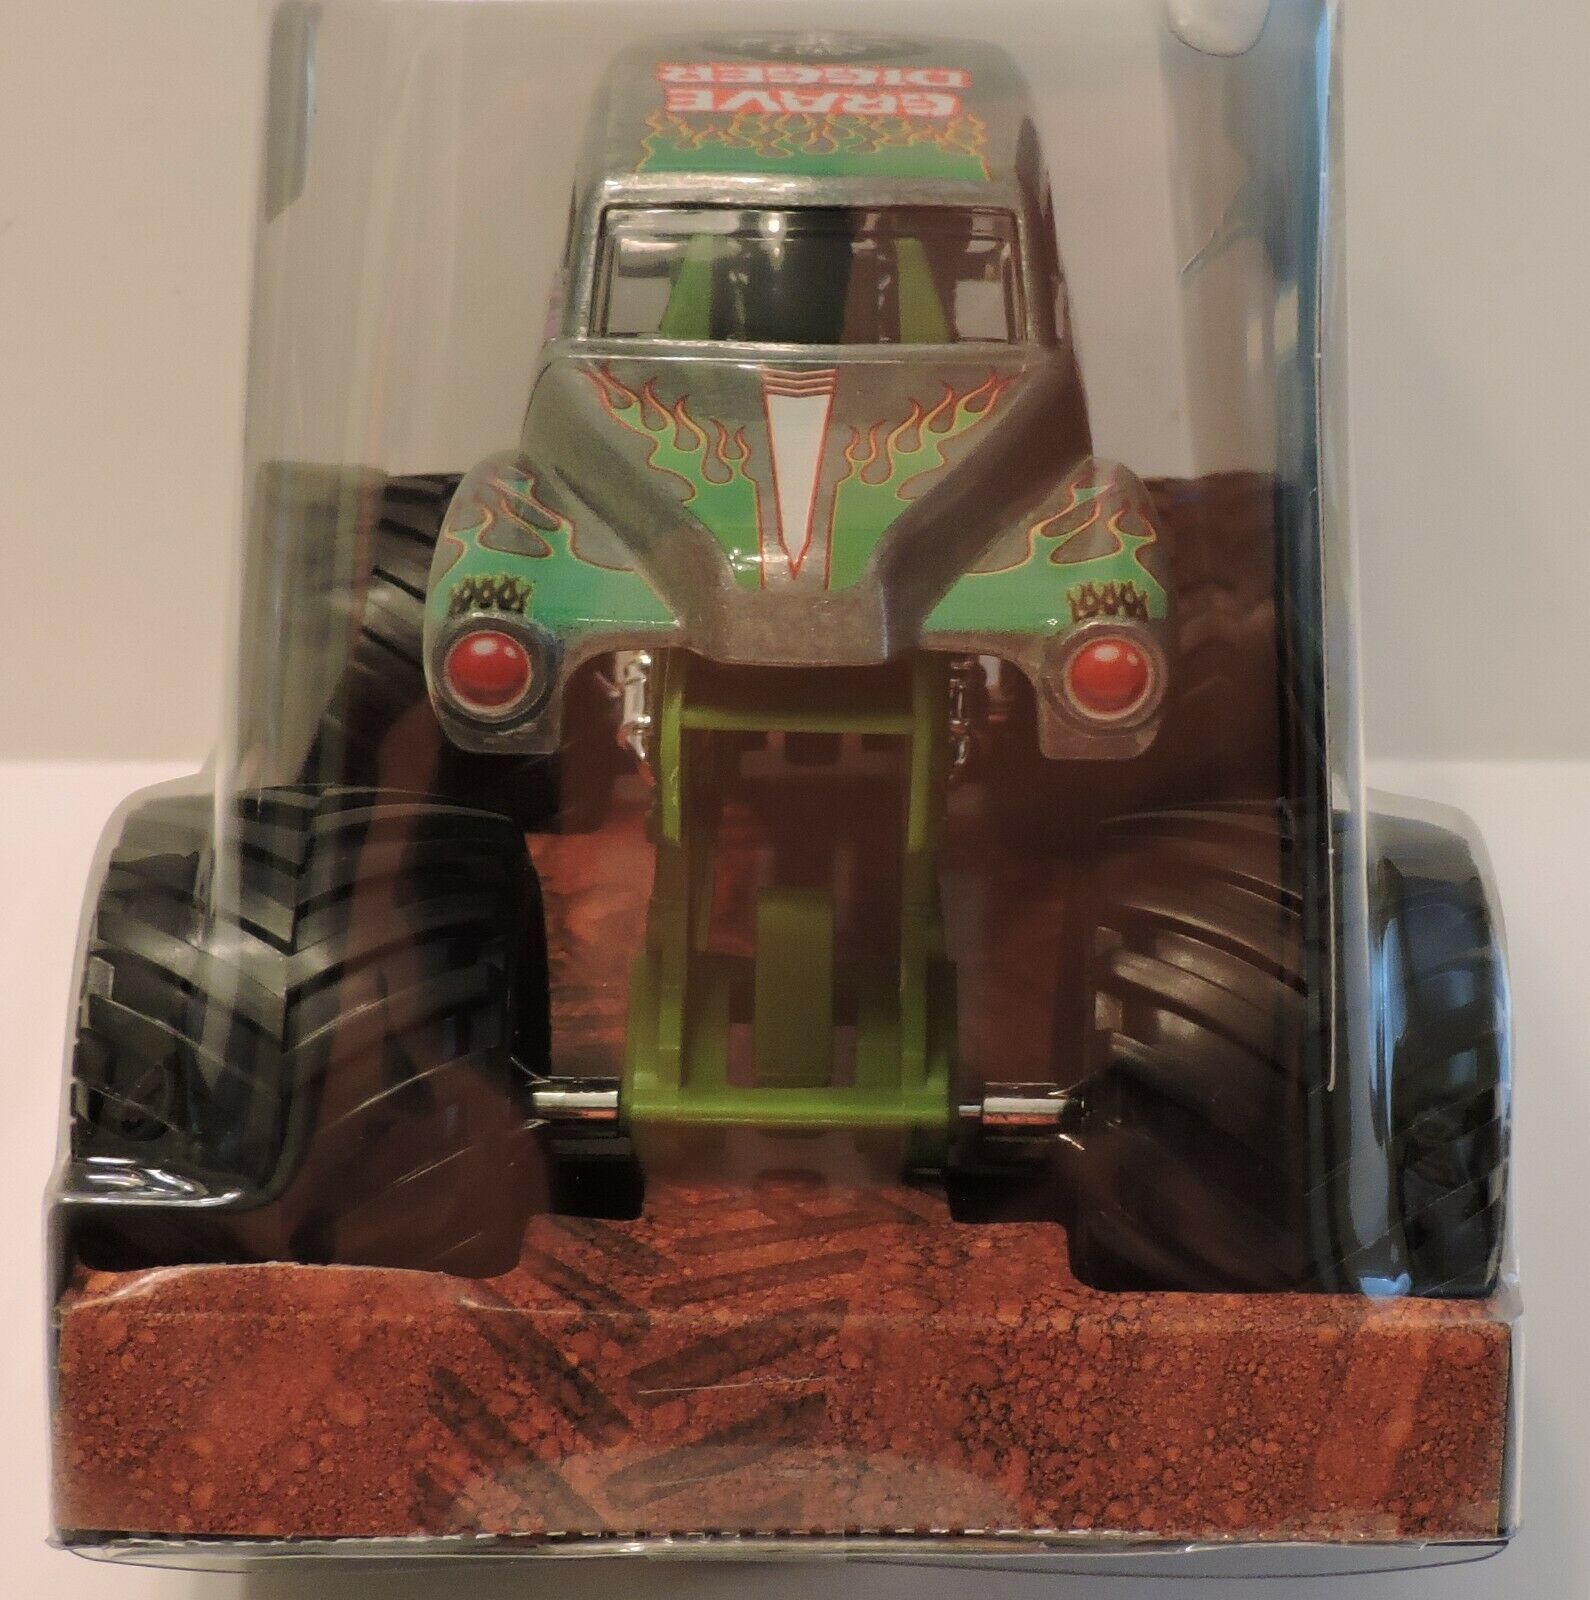 monster jam pc game grave digger silver